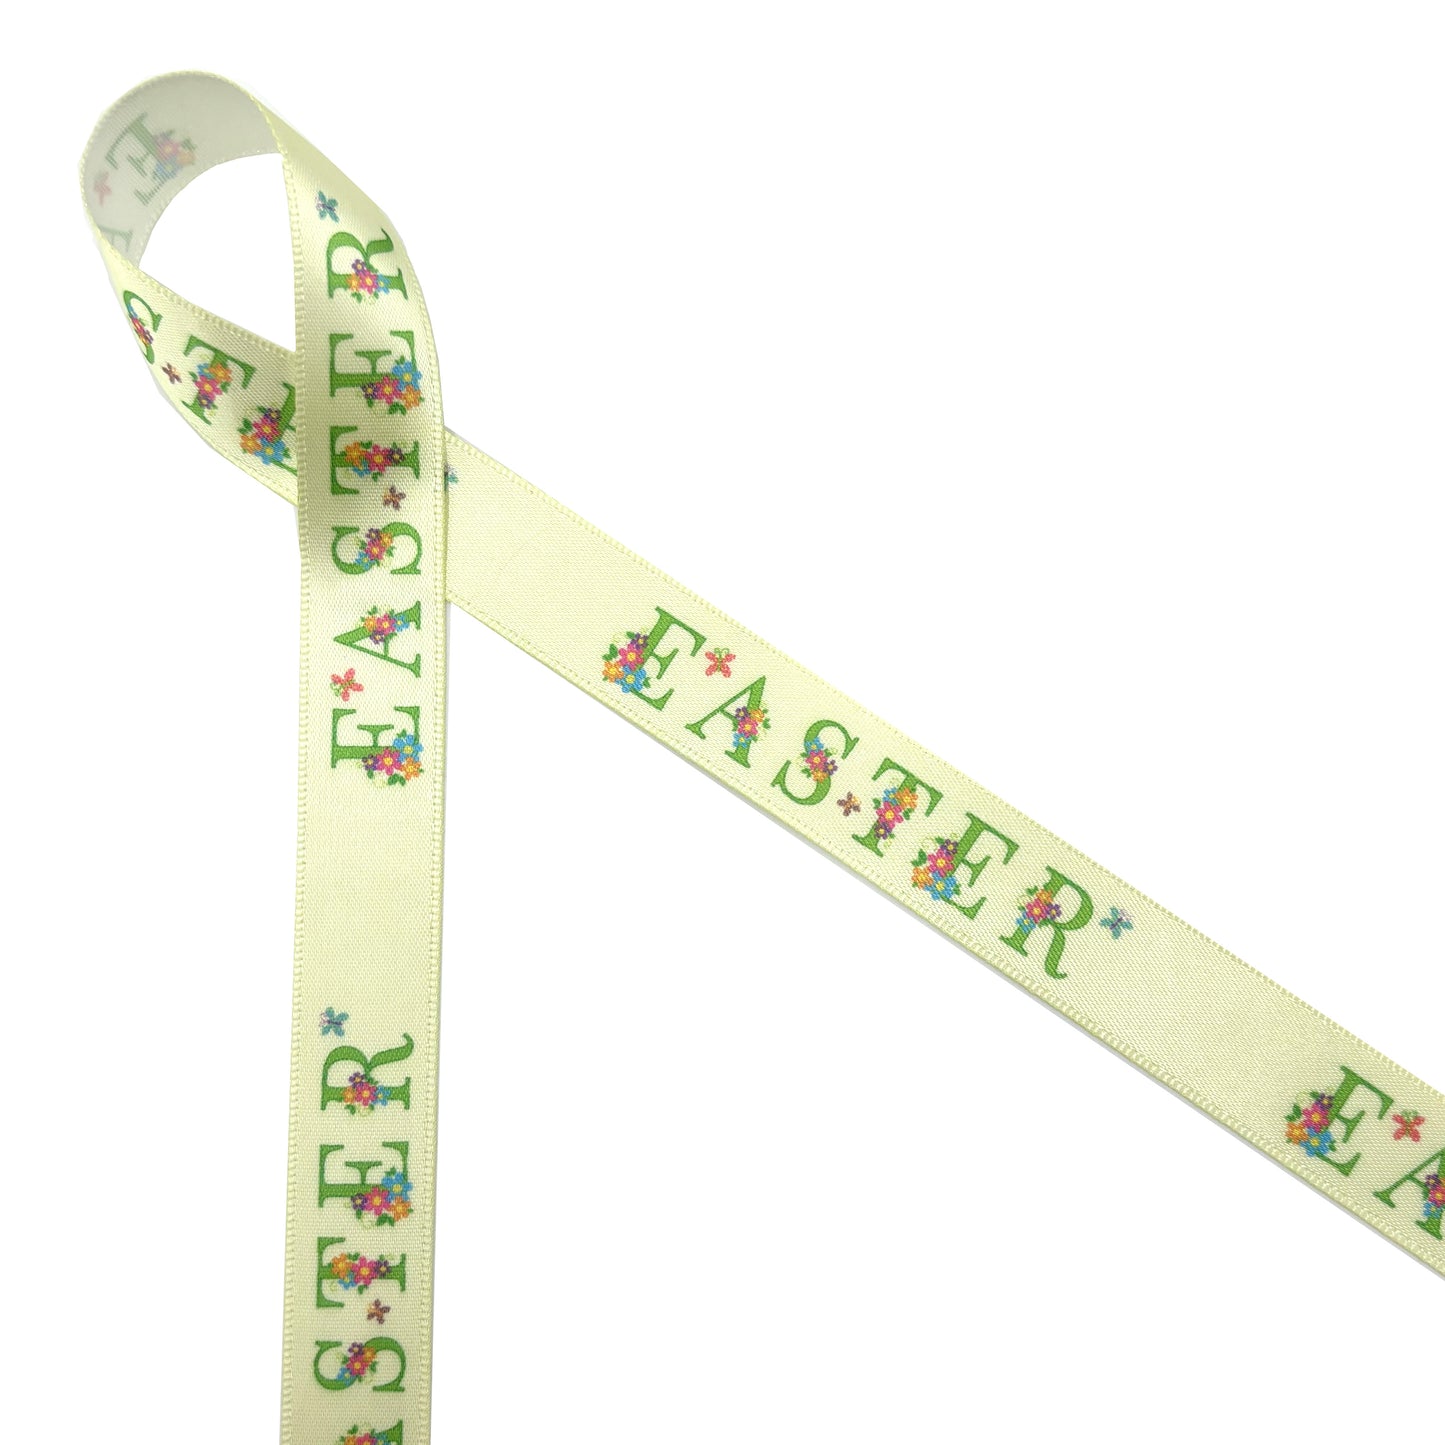 Easter ribbon Easter in green text decorated with Spring flowers on a yellow background printed on 5/8" and 7/8" white satin